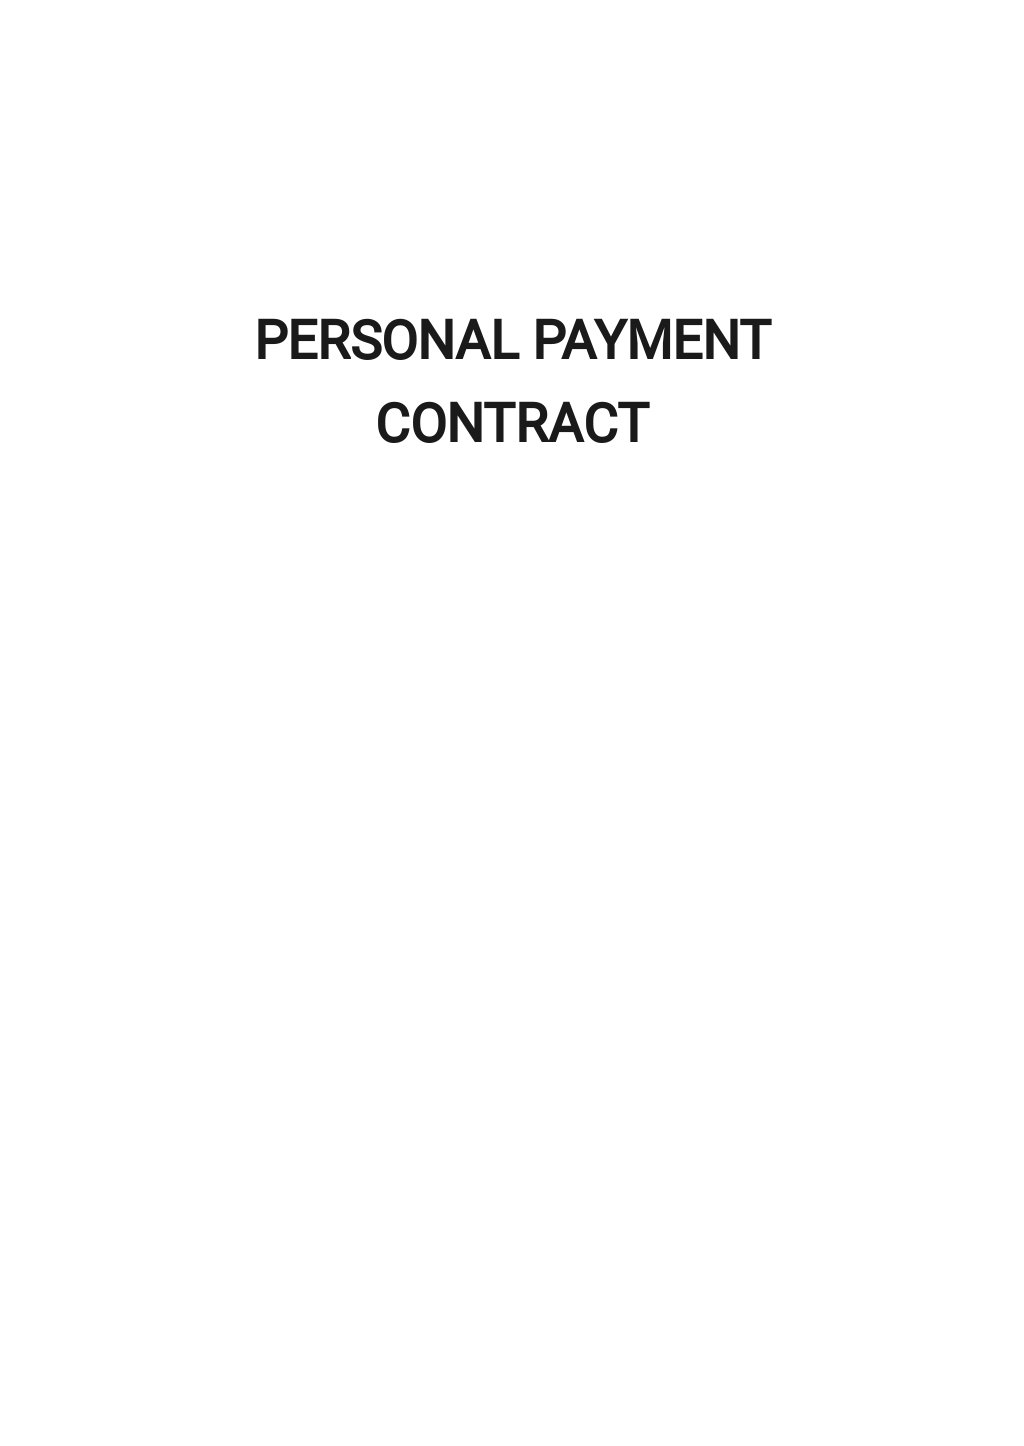 Personal Payment Contract Template.jpe